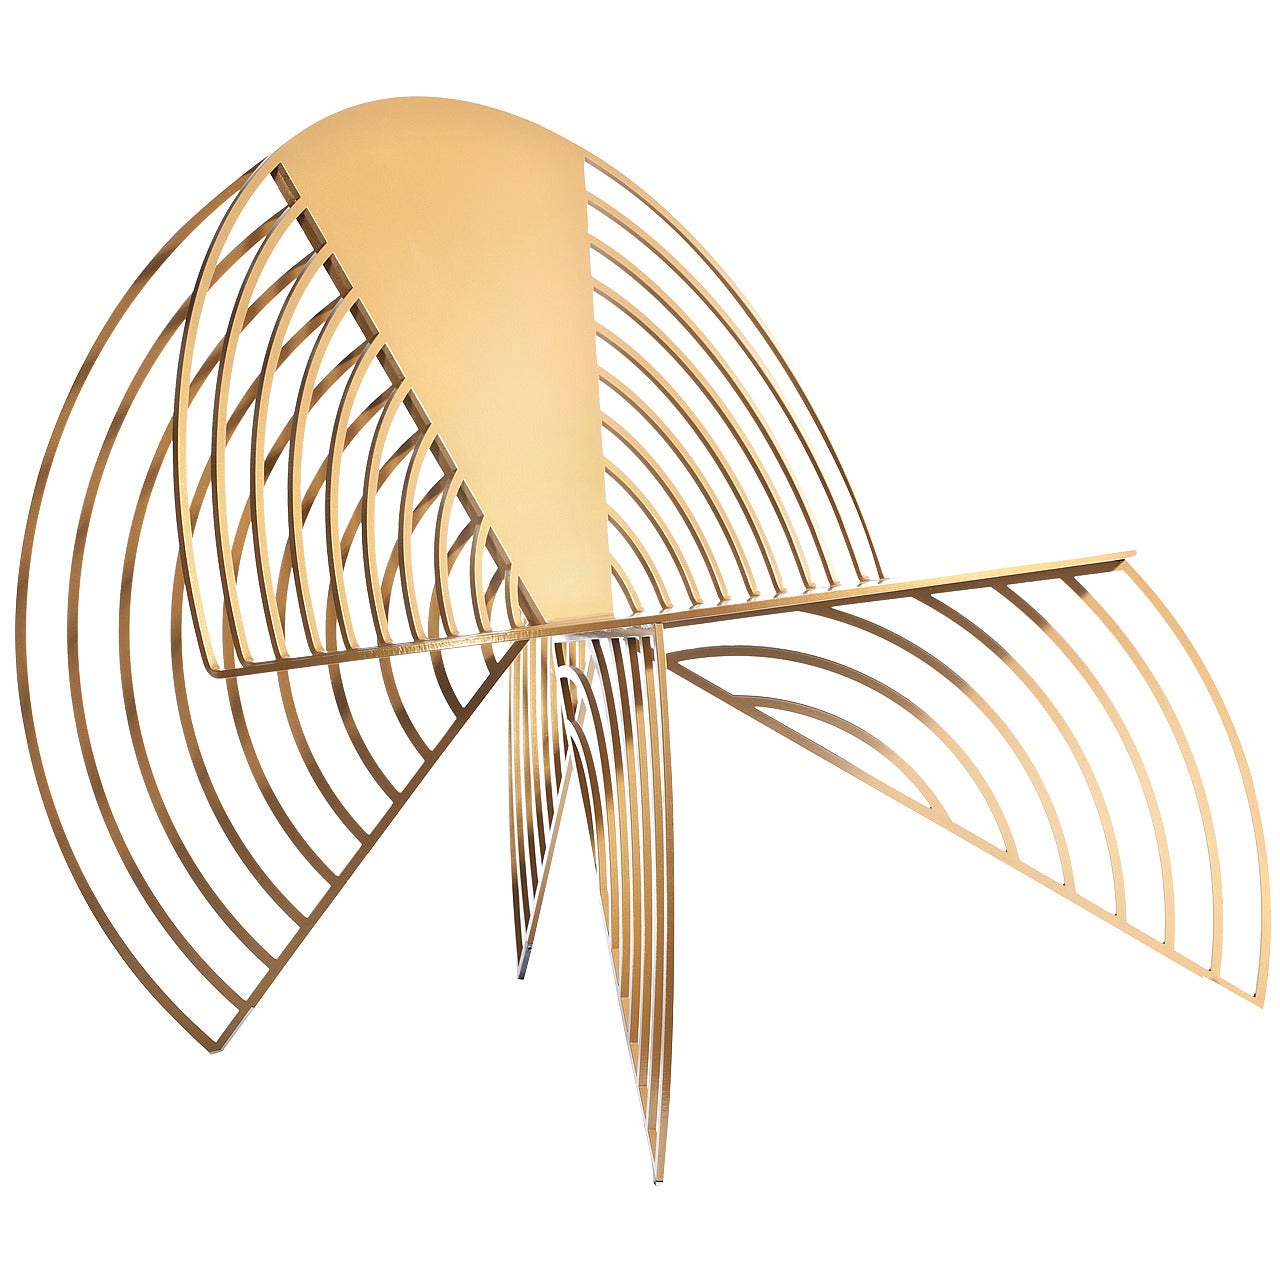 Golden Wings of Steel Chair, Designed by Laurie Beckerman in 2012